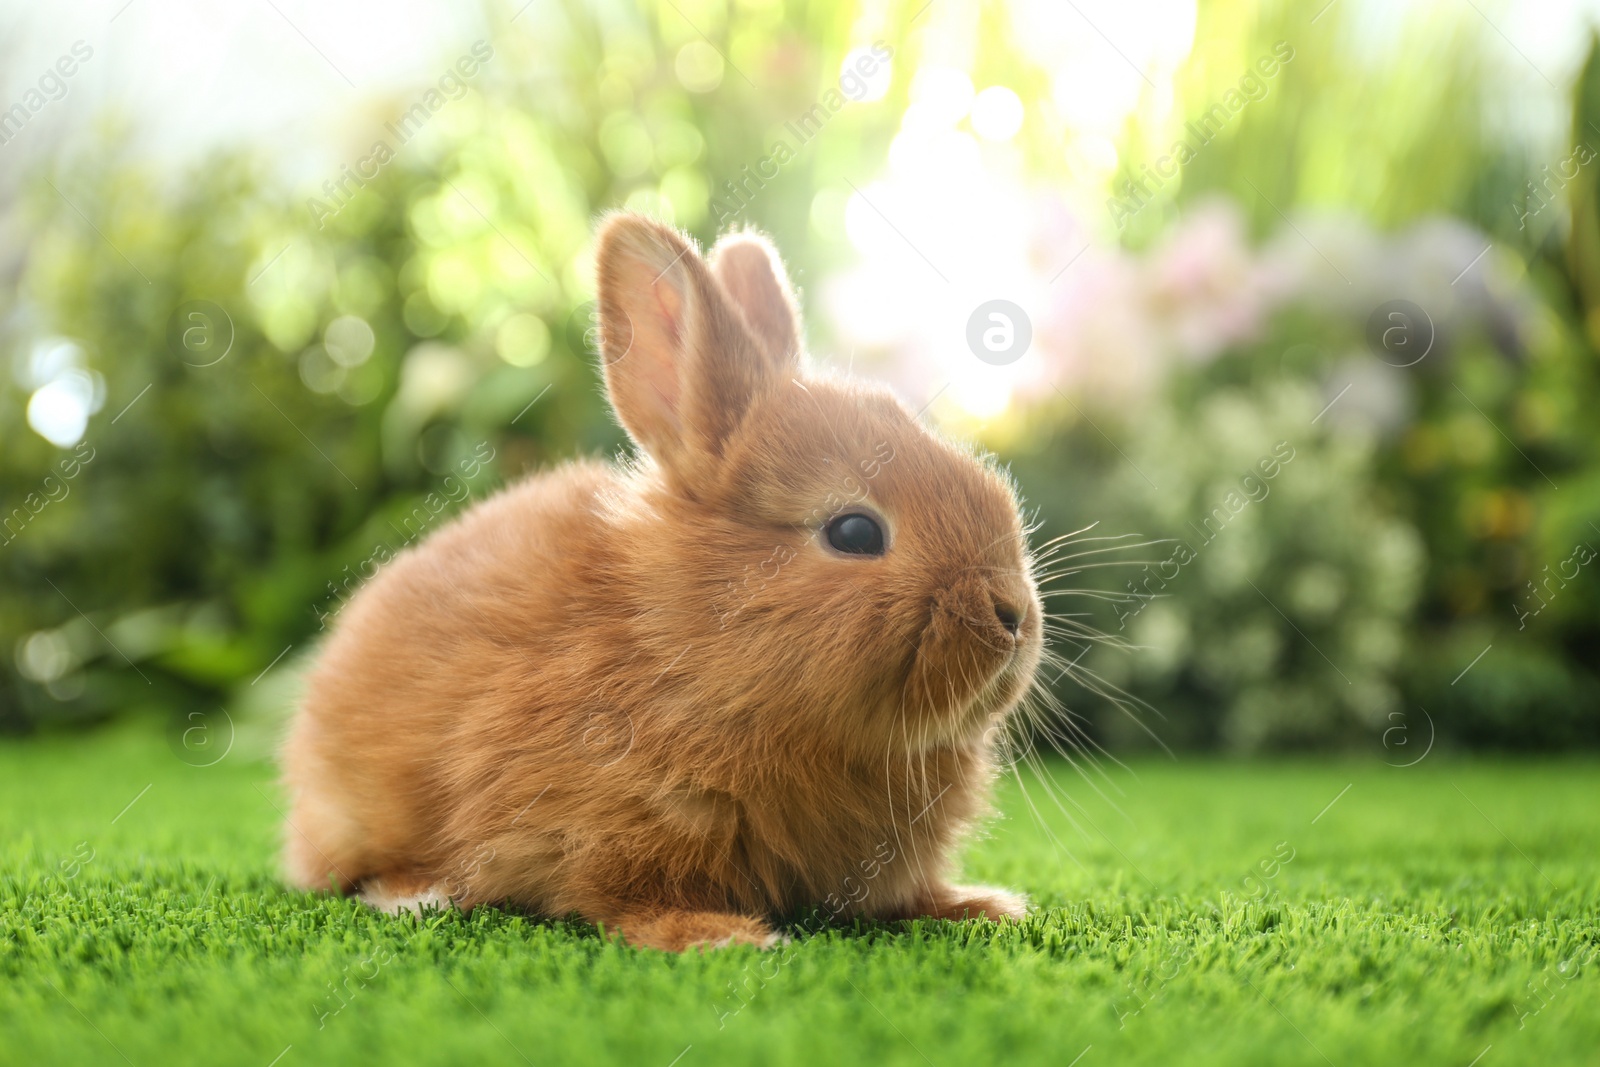 Photo of Adorable fluffy bunny on green grass against blurred background. Easter symbol